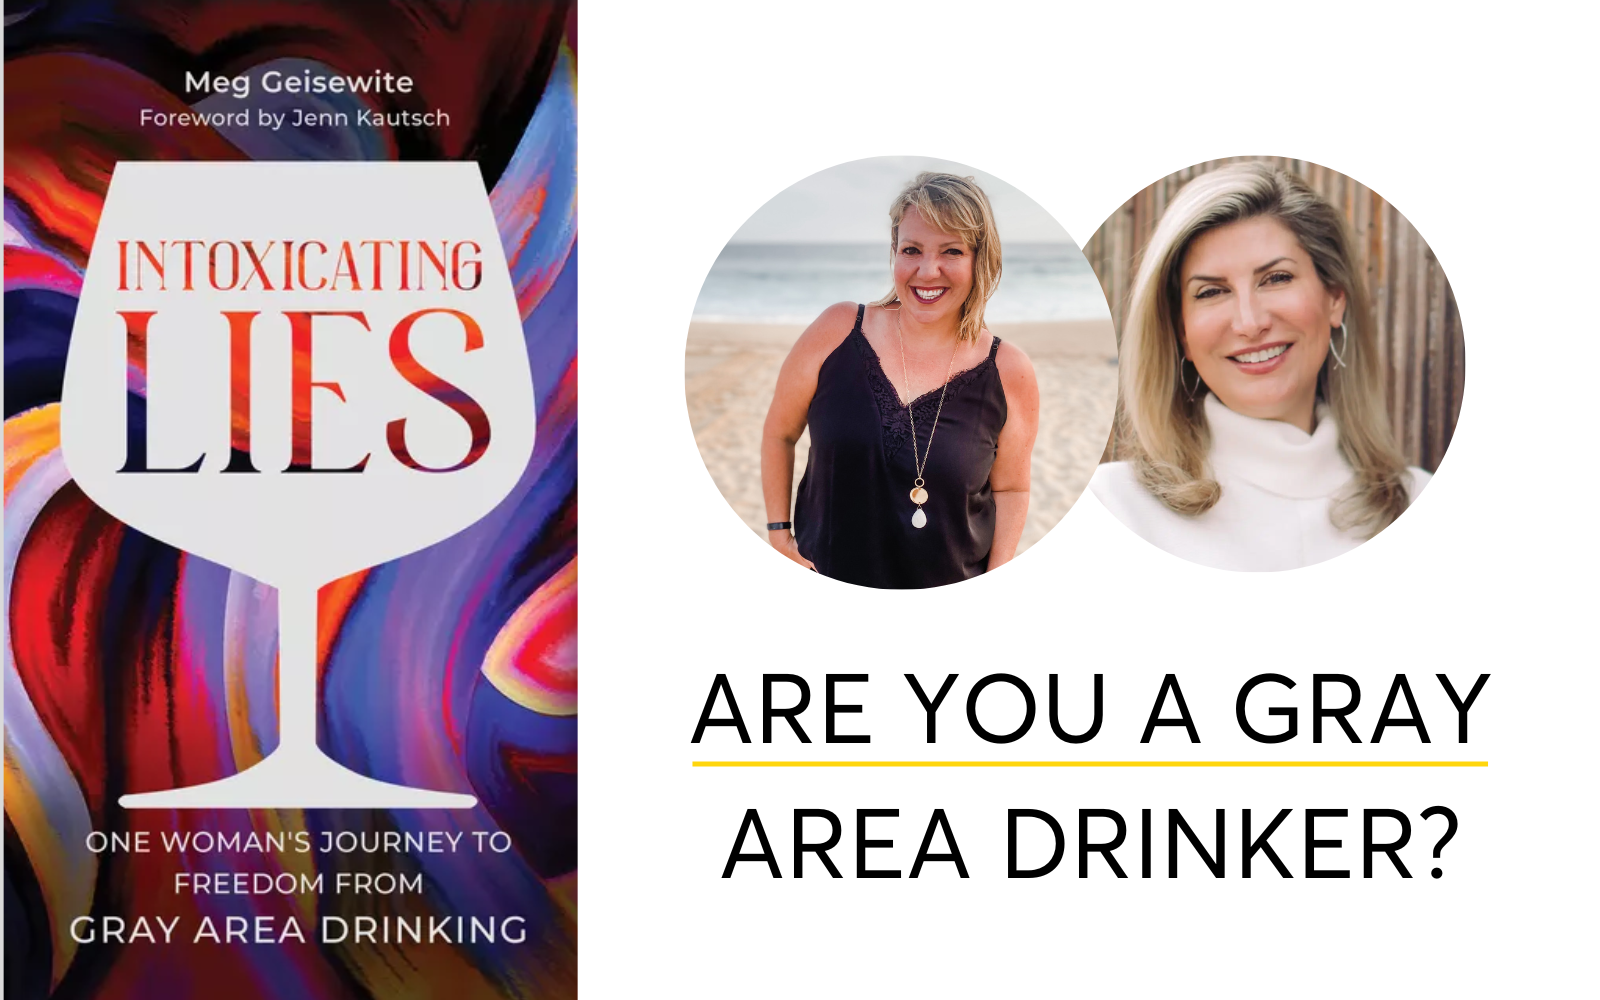 Are You A Gray Area Drinker?